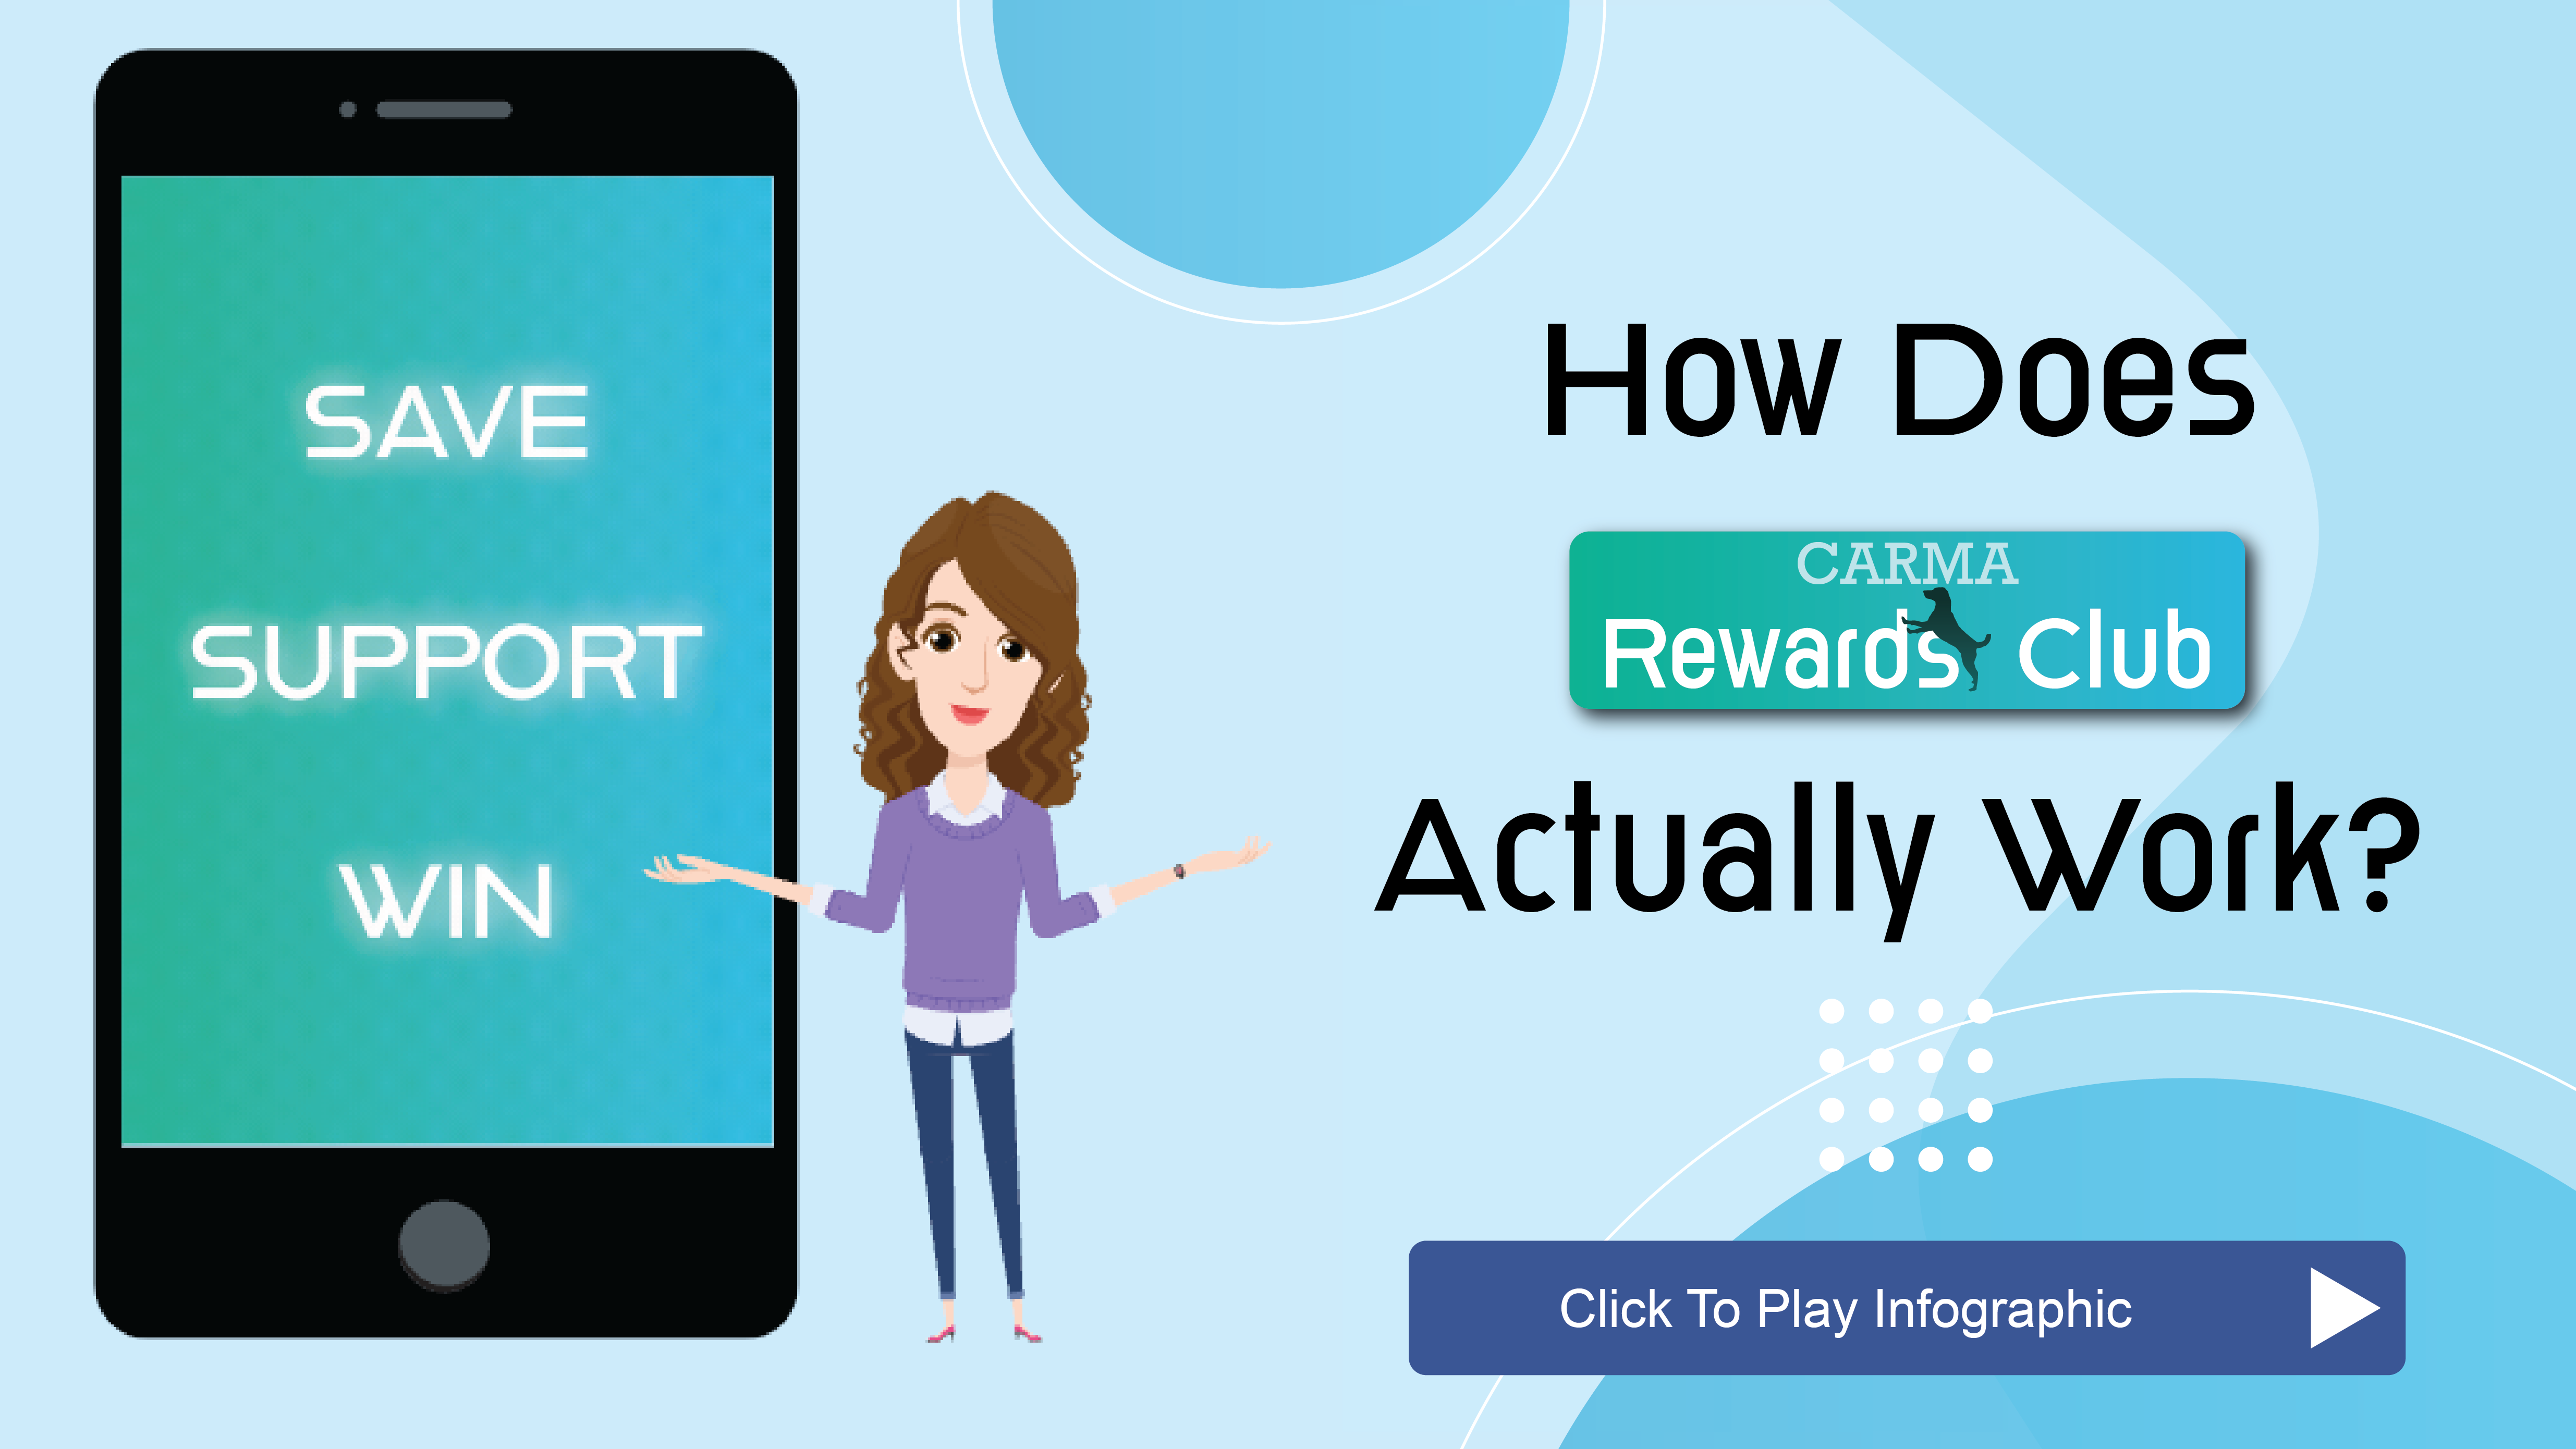 Animated woman showing how to use CARMA Rewards Club